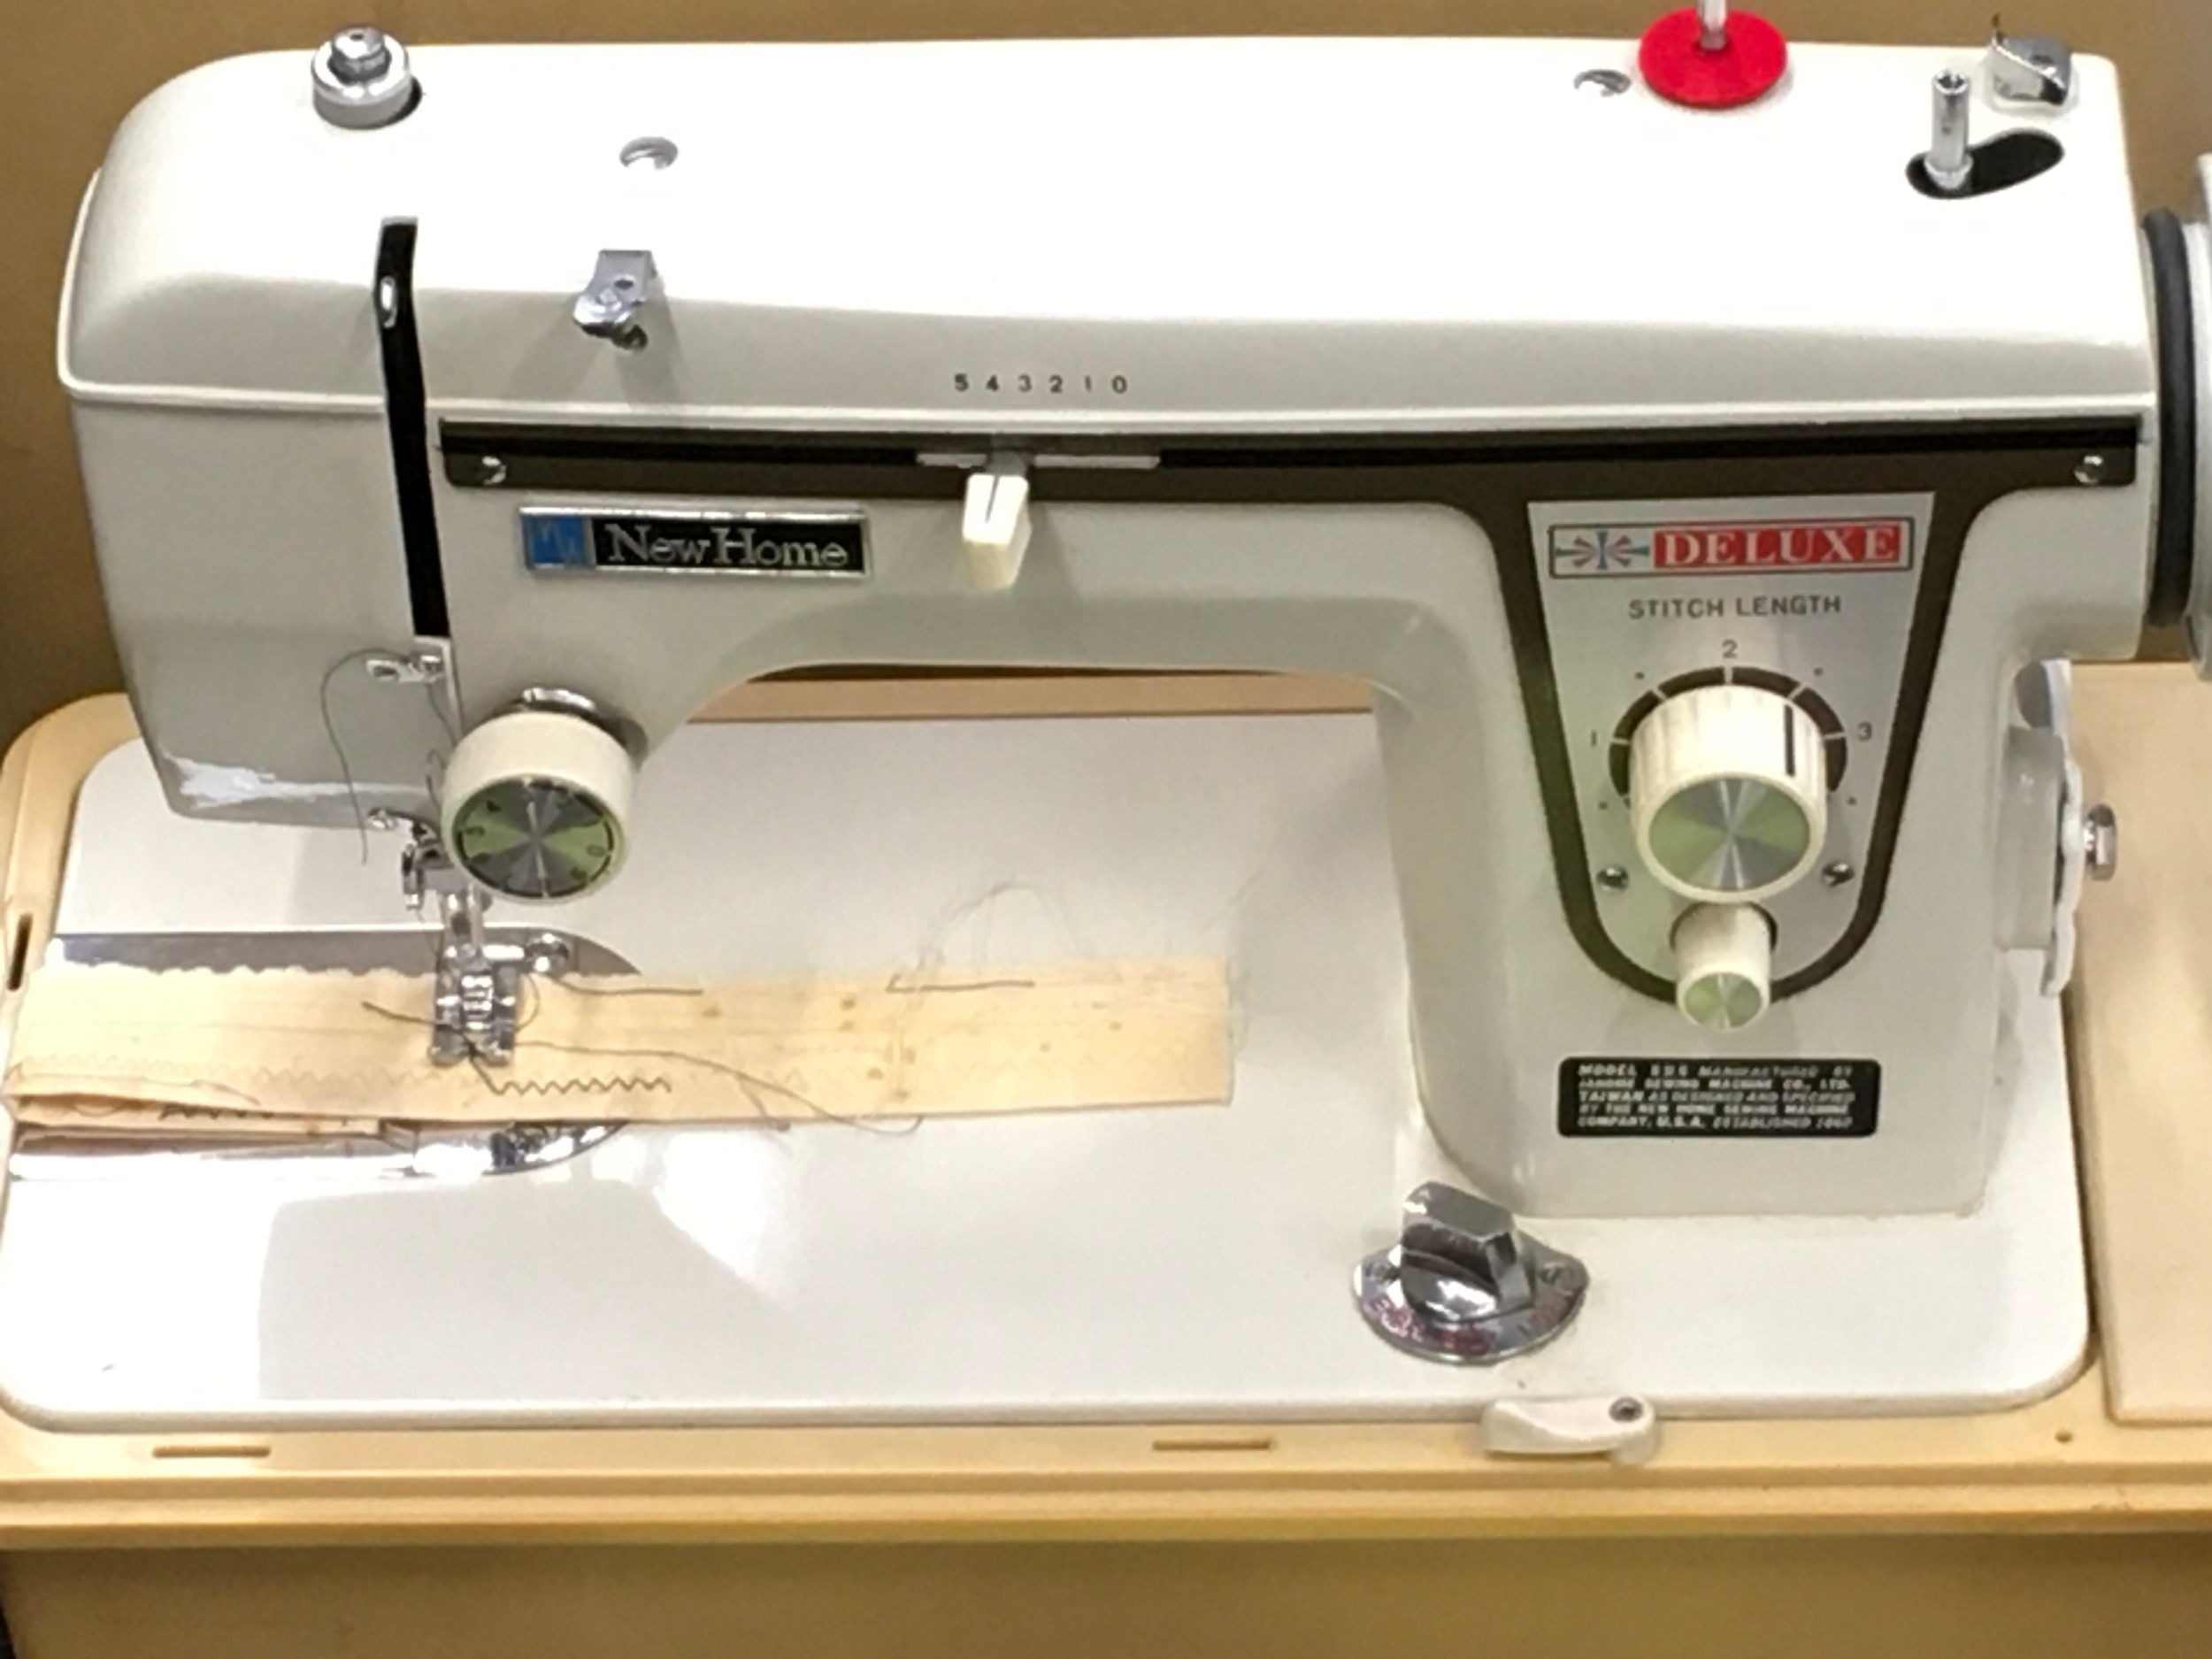 New Home Deluxe model 525 electric sewing machine with instruction manual. - Image 3 of 3